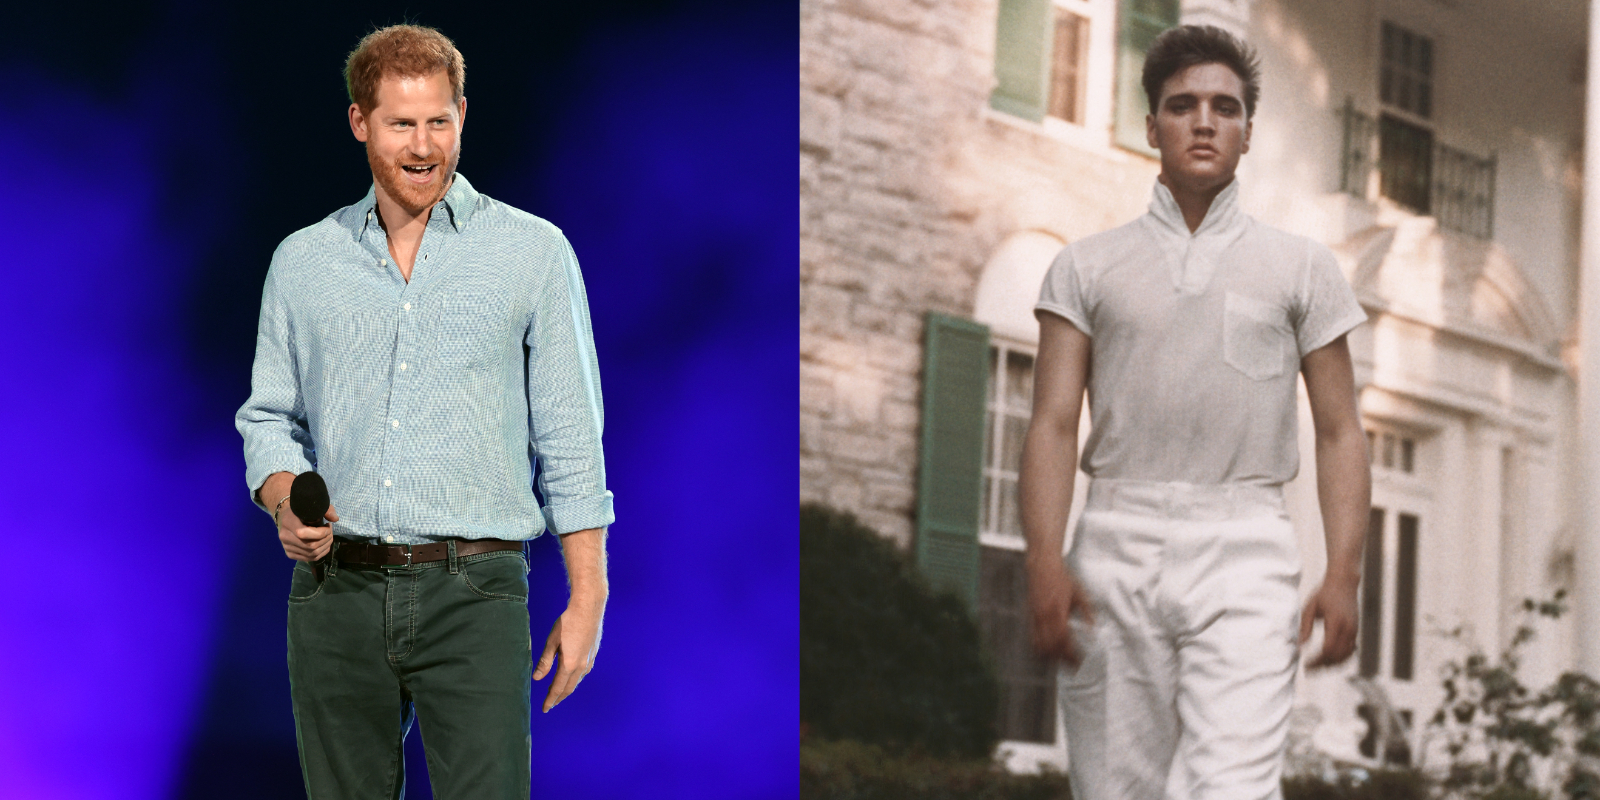 Prince Harry and Elvis Presley in side-by-side photographs.